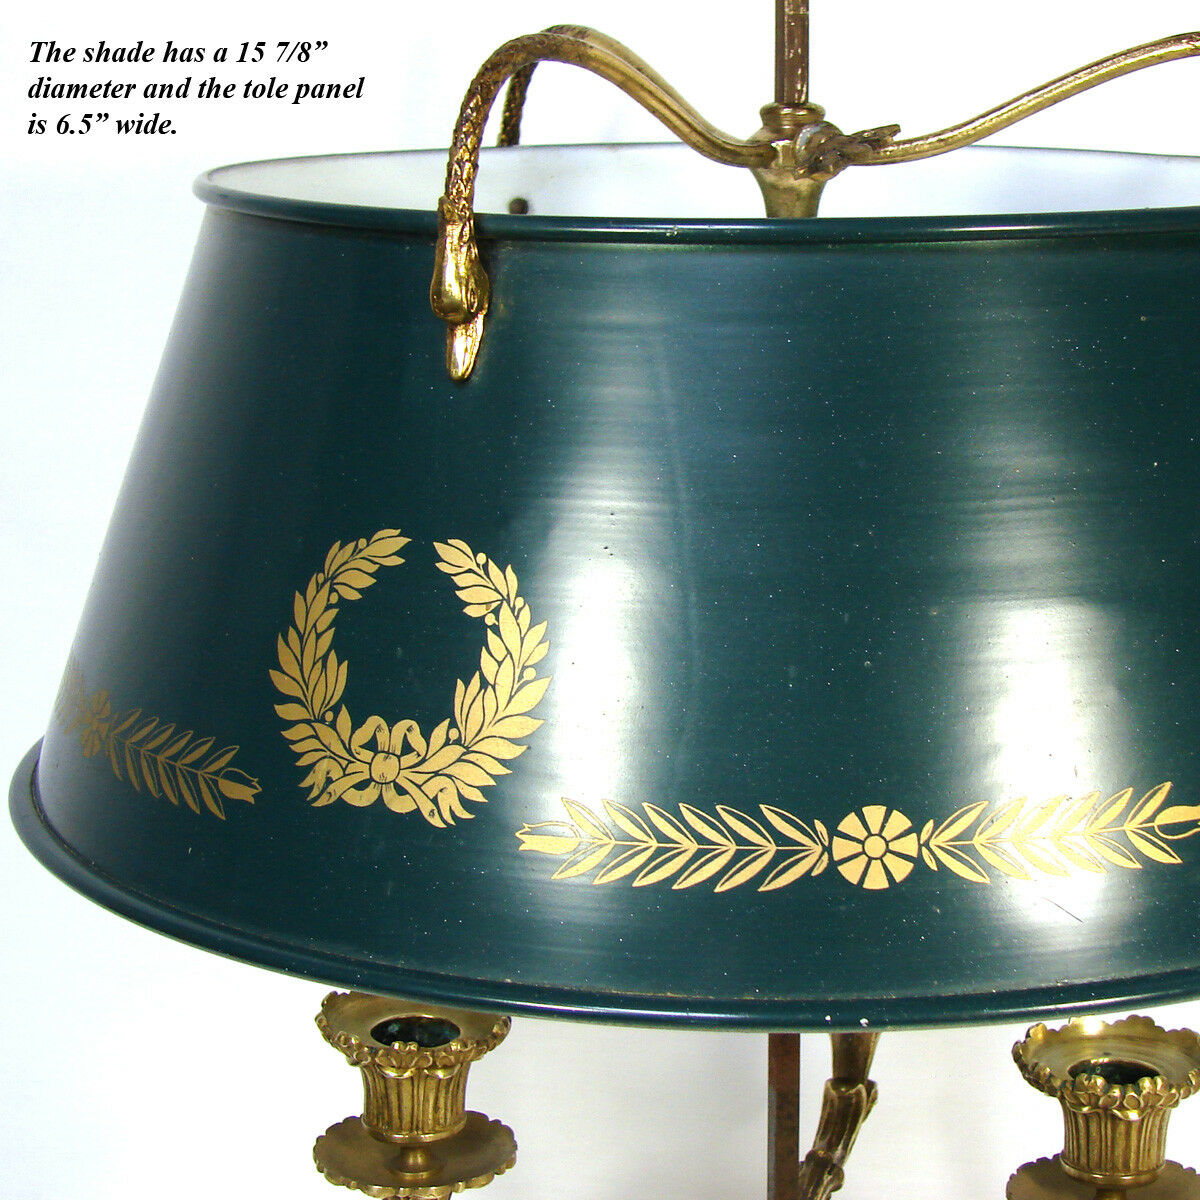 Antique French Bouillotte Lamp, Empire Period 3-Branch, Tole Shade, Swans c.1810